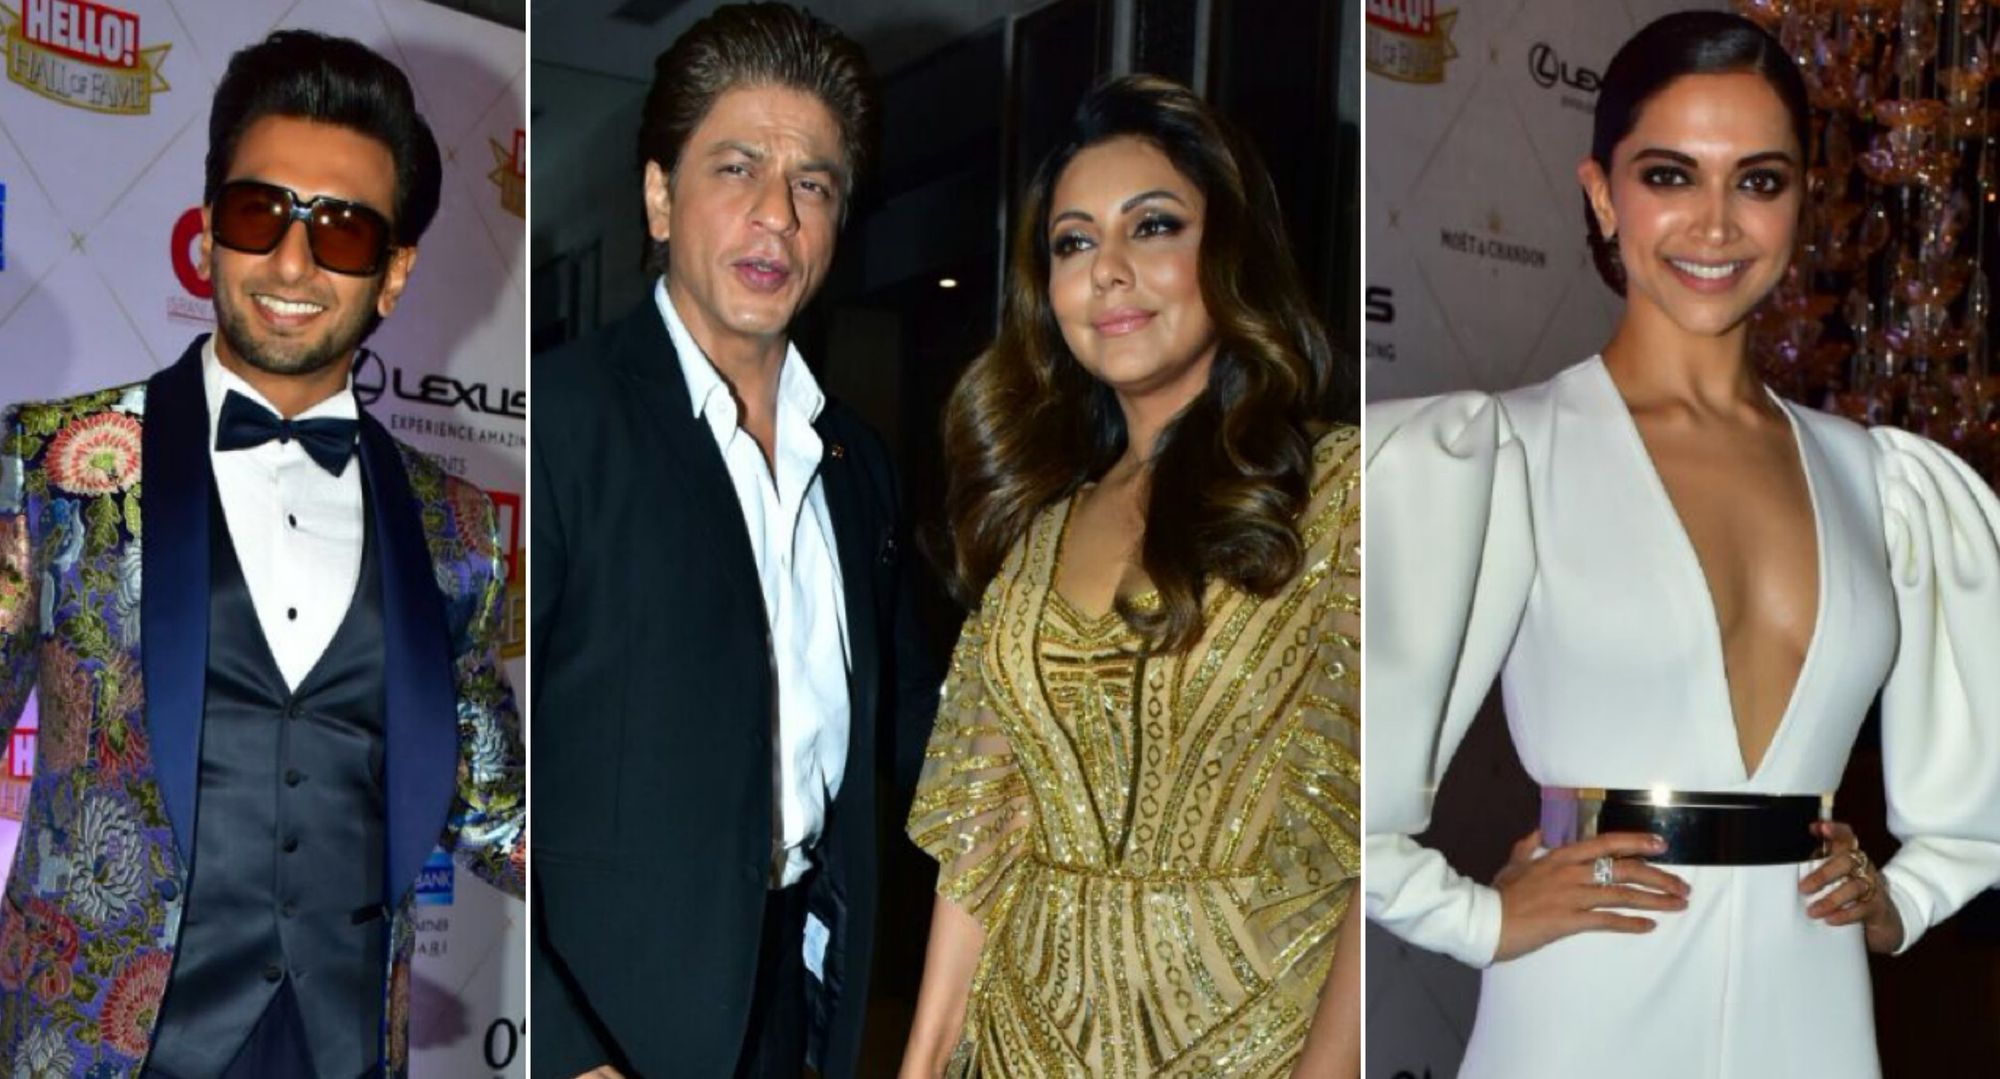 Photo Diary: Ranveer Singh, Deepika Padukone, Shah Rukh Khan &#038; Others At The Hello Hall Of Fame Awards